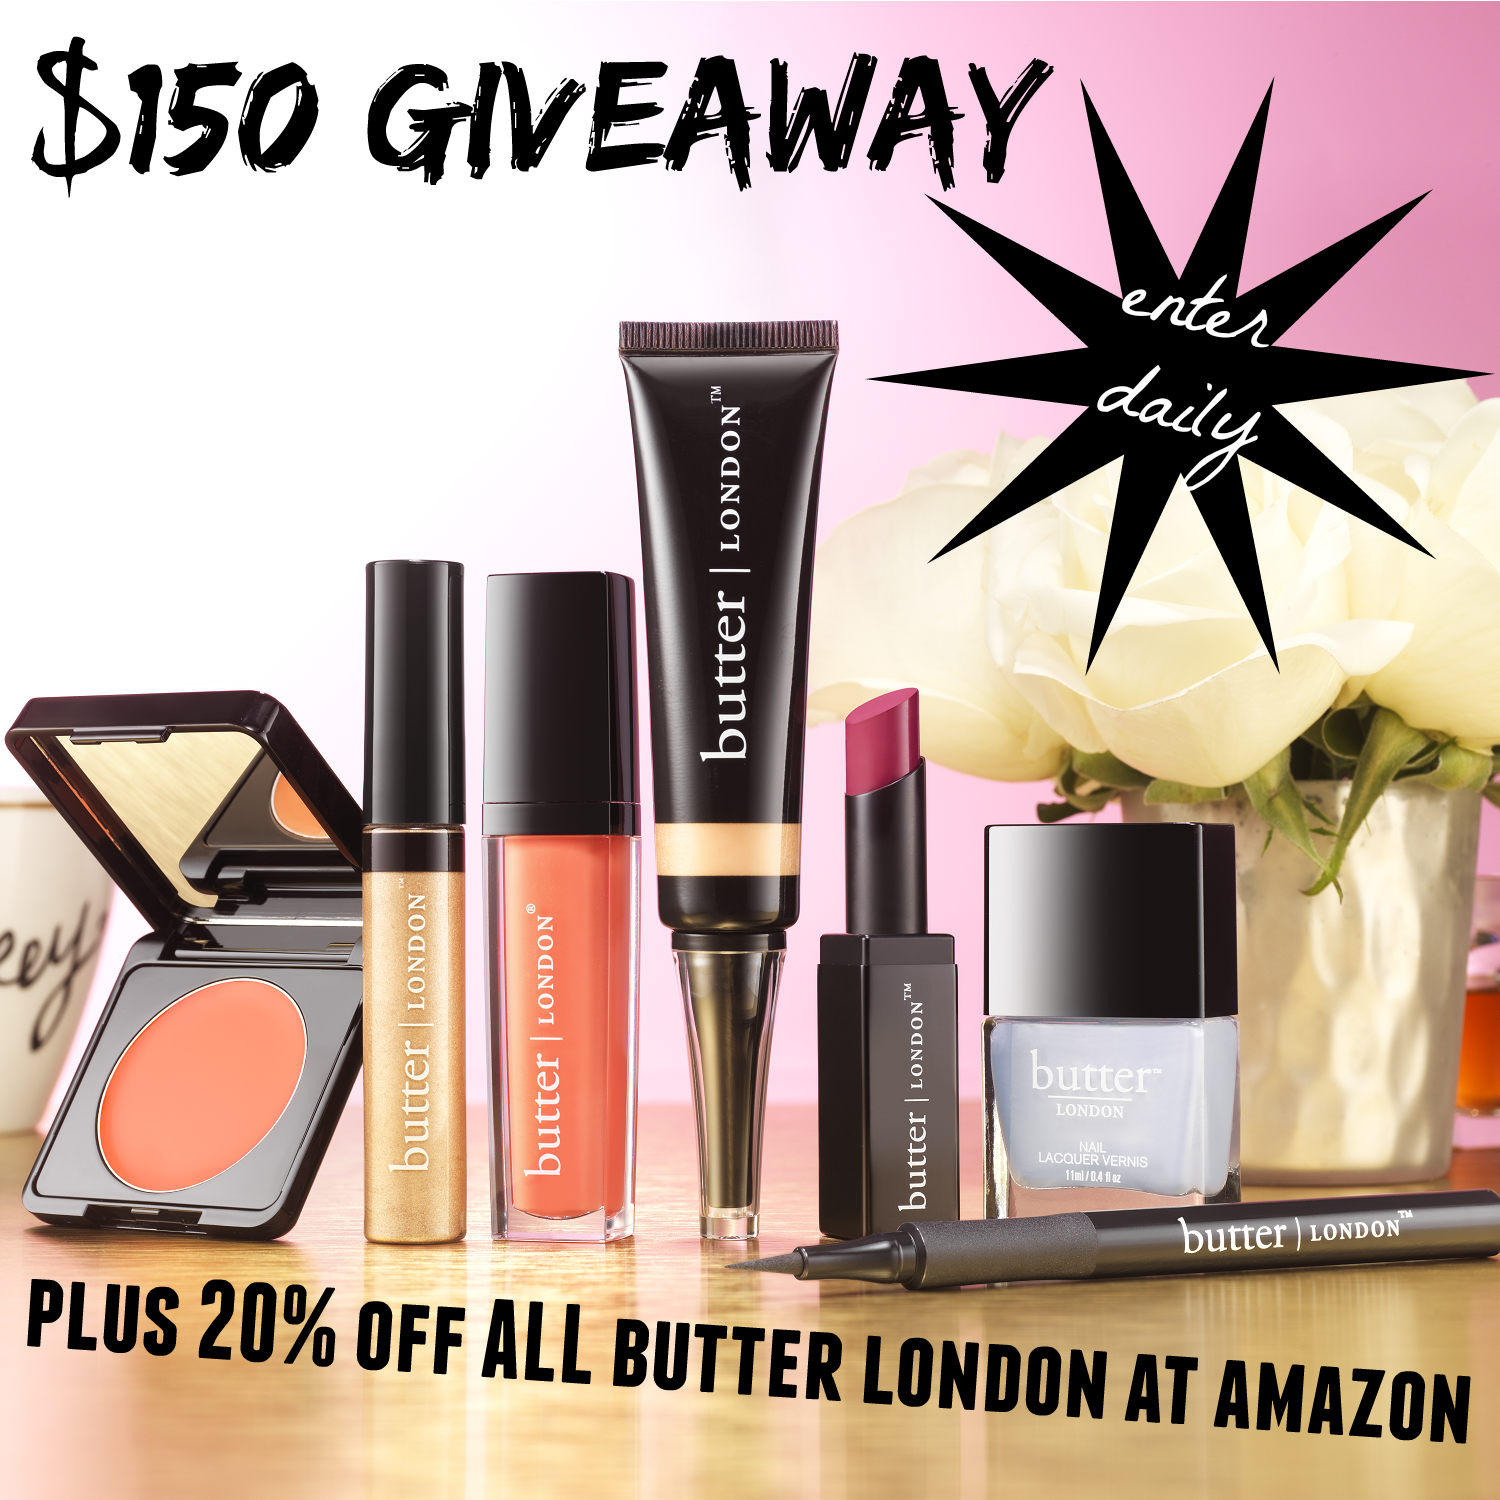 Giveaway of $150 worth of butter LONDON cosmetics plus take 20% off ALL butter LONDON cosmetics at Amazon's Luxury Beauty Store